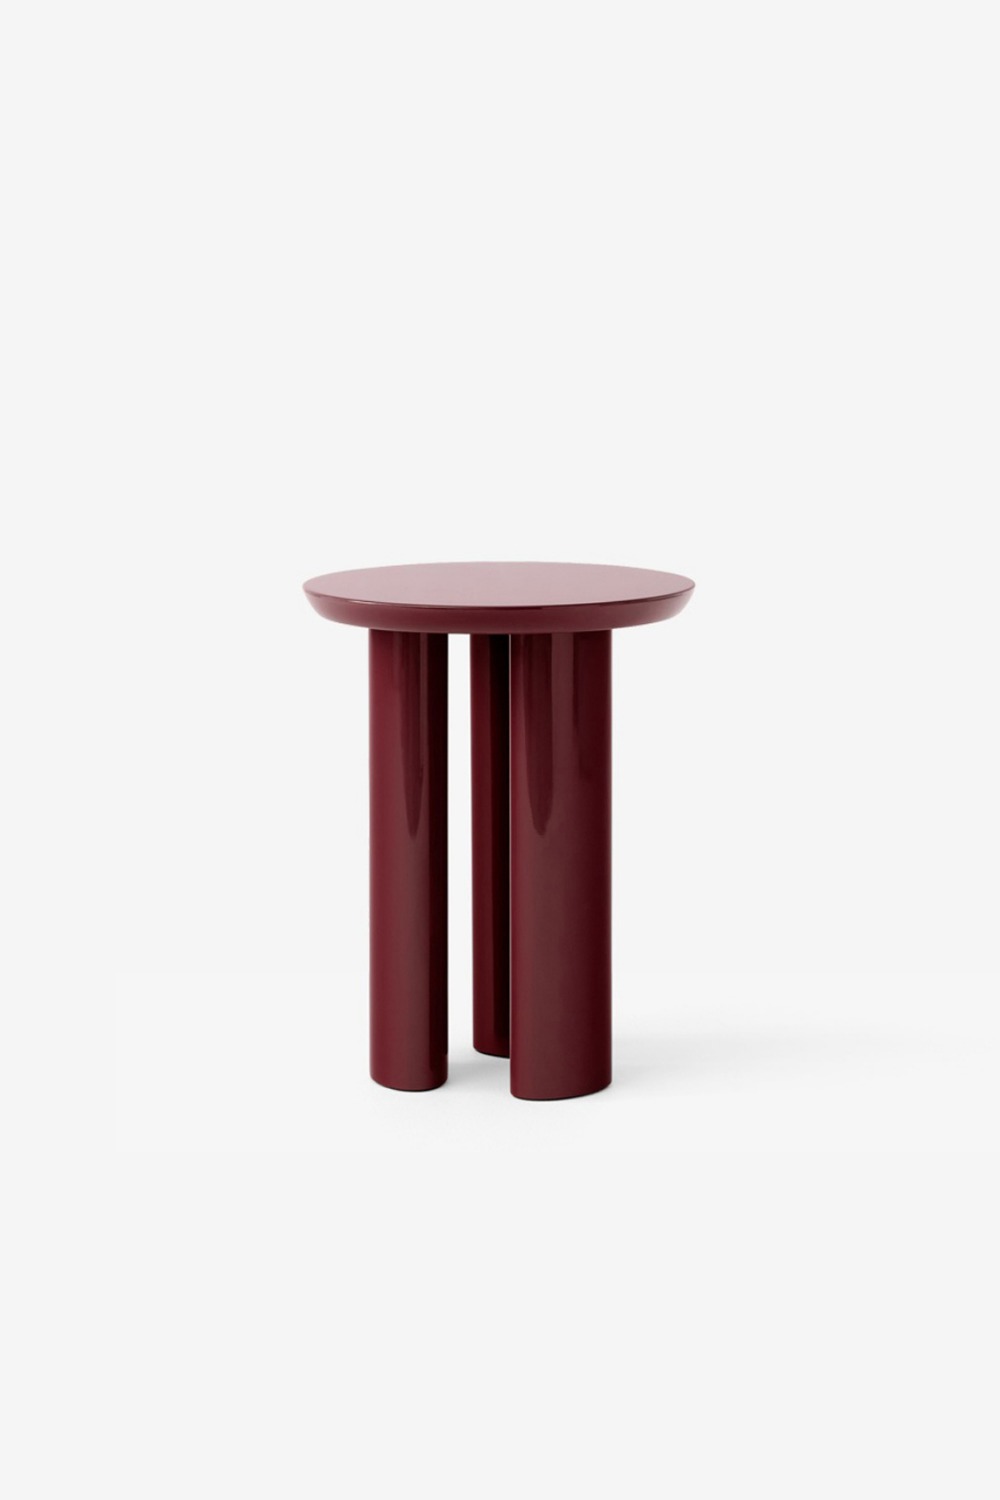 [&amp;Tradition] Tung Table /JA3 (Burgundy Red)